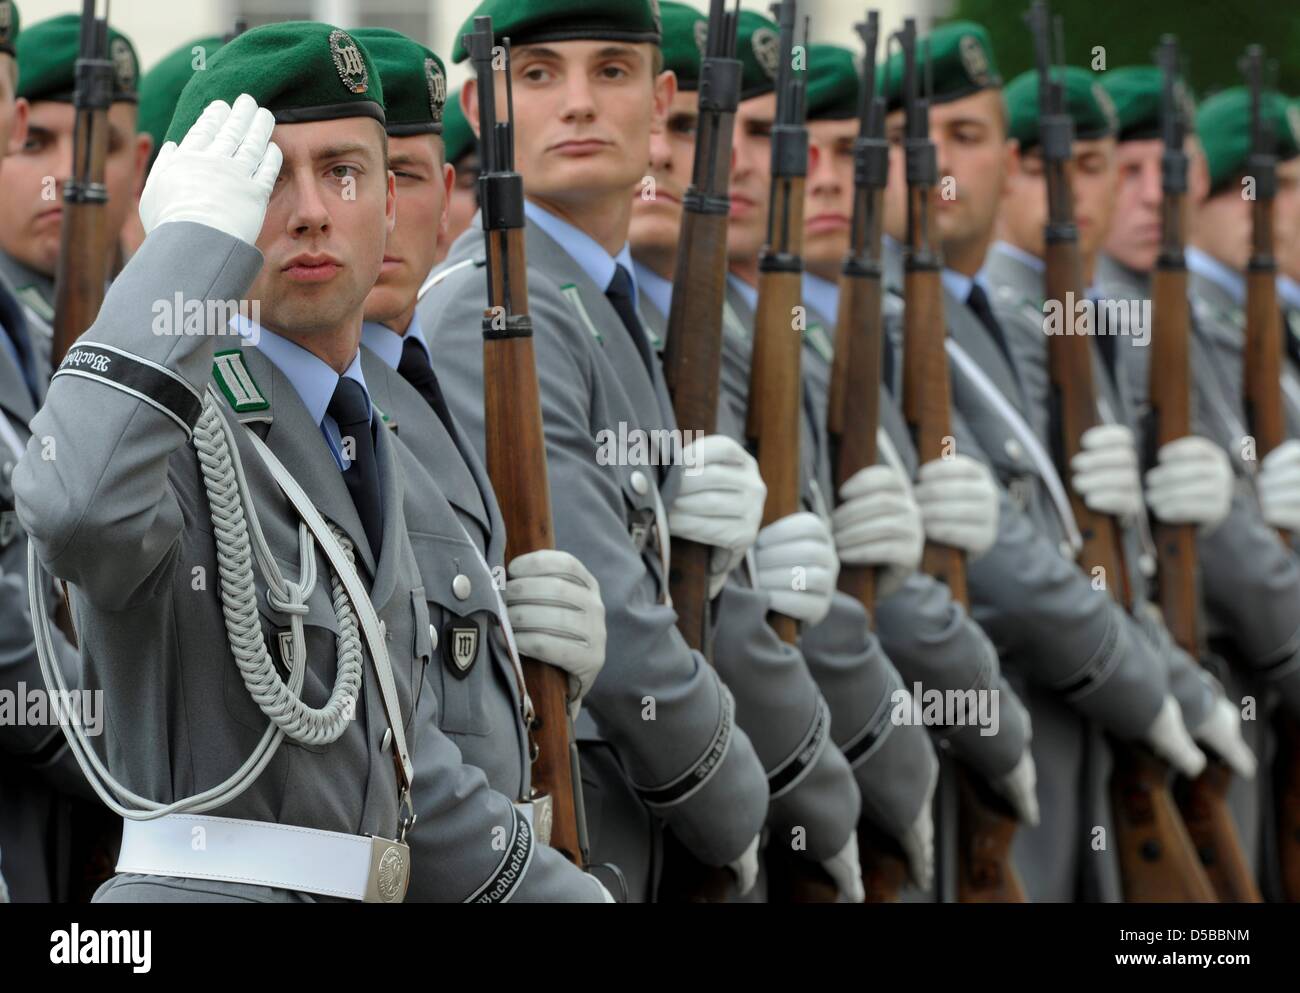 Soldiers of the guard of honour of the Bundeswehr (German military) salute in front of Bellevue Palace in Berlin, Germany, 03 August 2010. German Defence Minister Karl-Theodor zu Guttenberg wants to achieve a sweeping reform of the armed forces before the end of 2010. Decisions will be made in the autum, Guttenberg said. Photo: Tim Brakemeier dpa Stock Photo